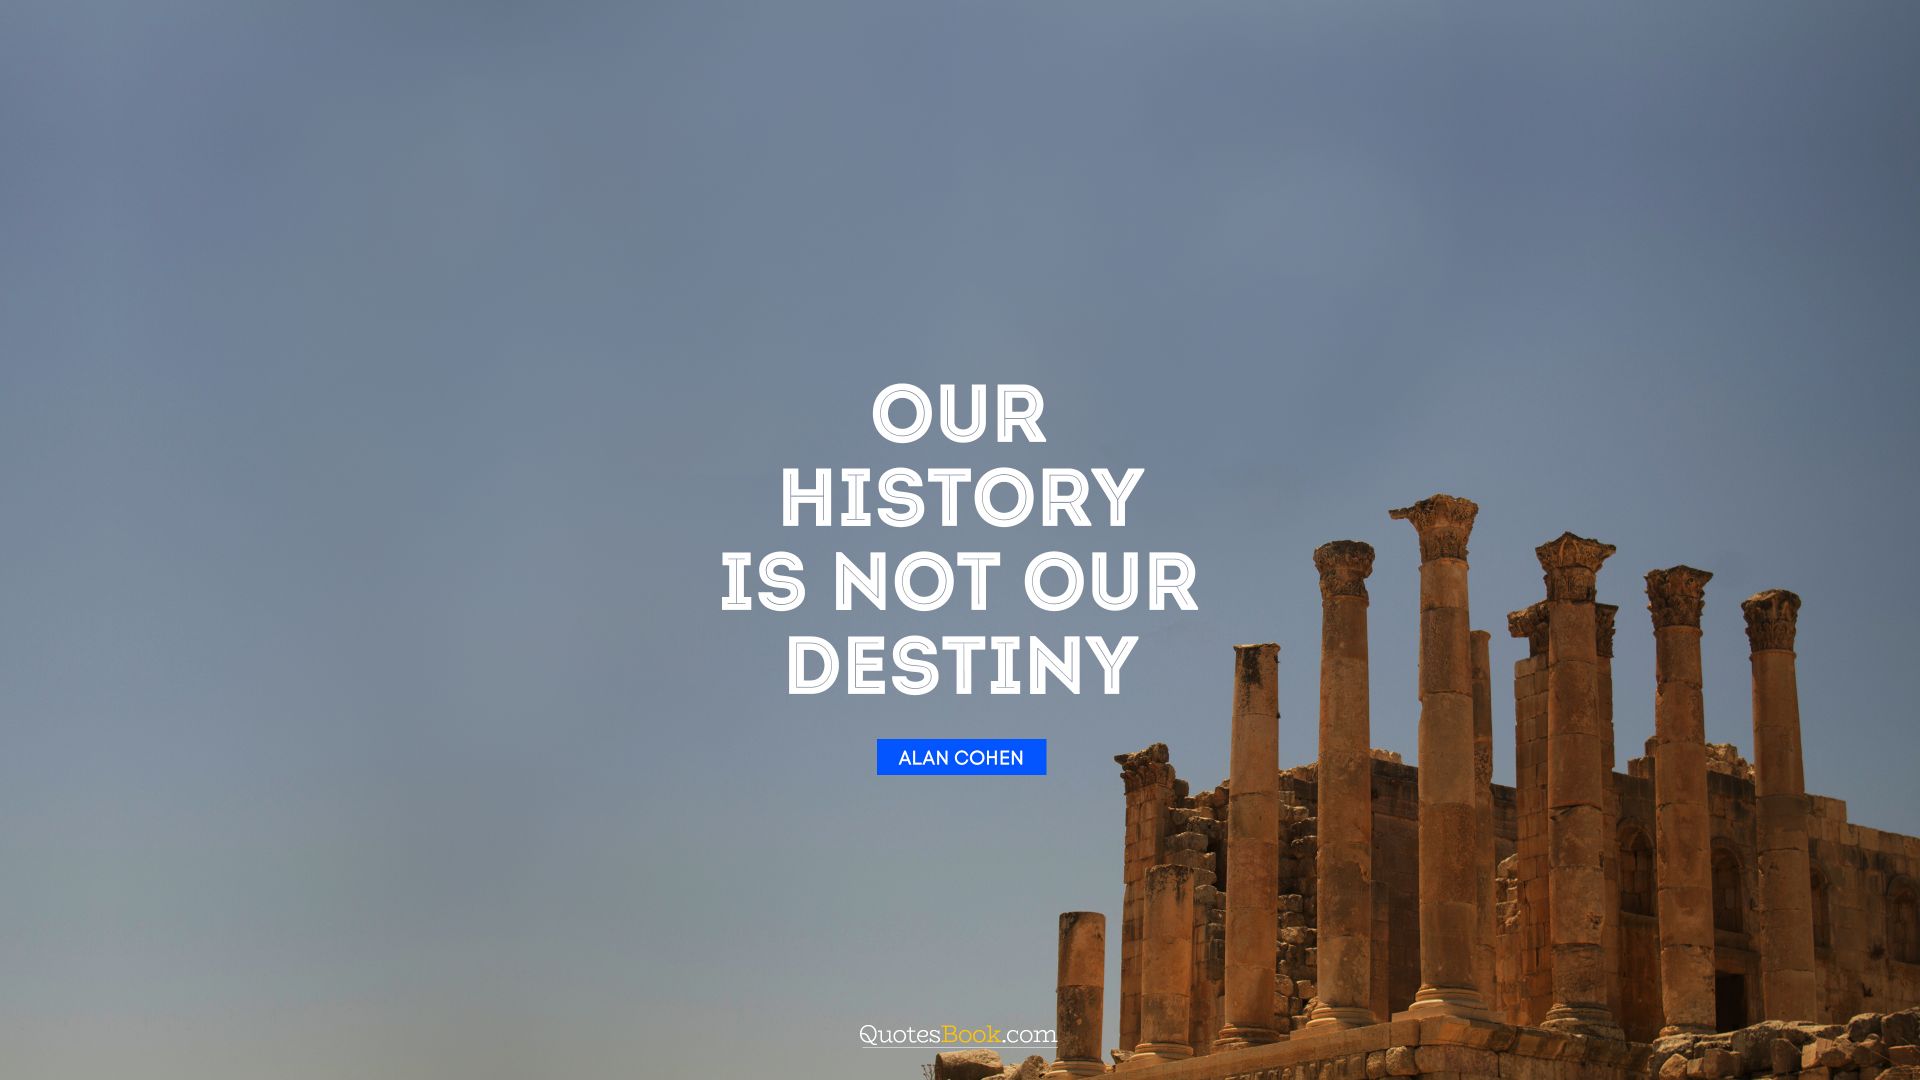 Our history is not our destiny. - Quote by Alan Cohen